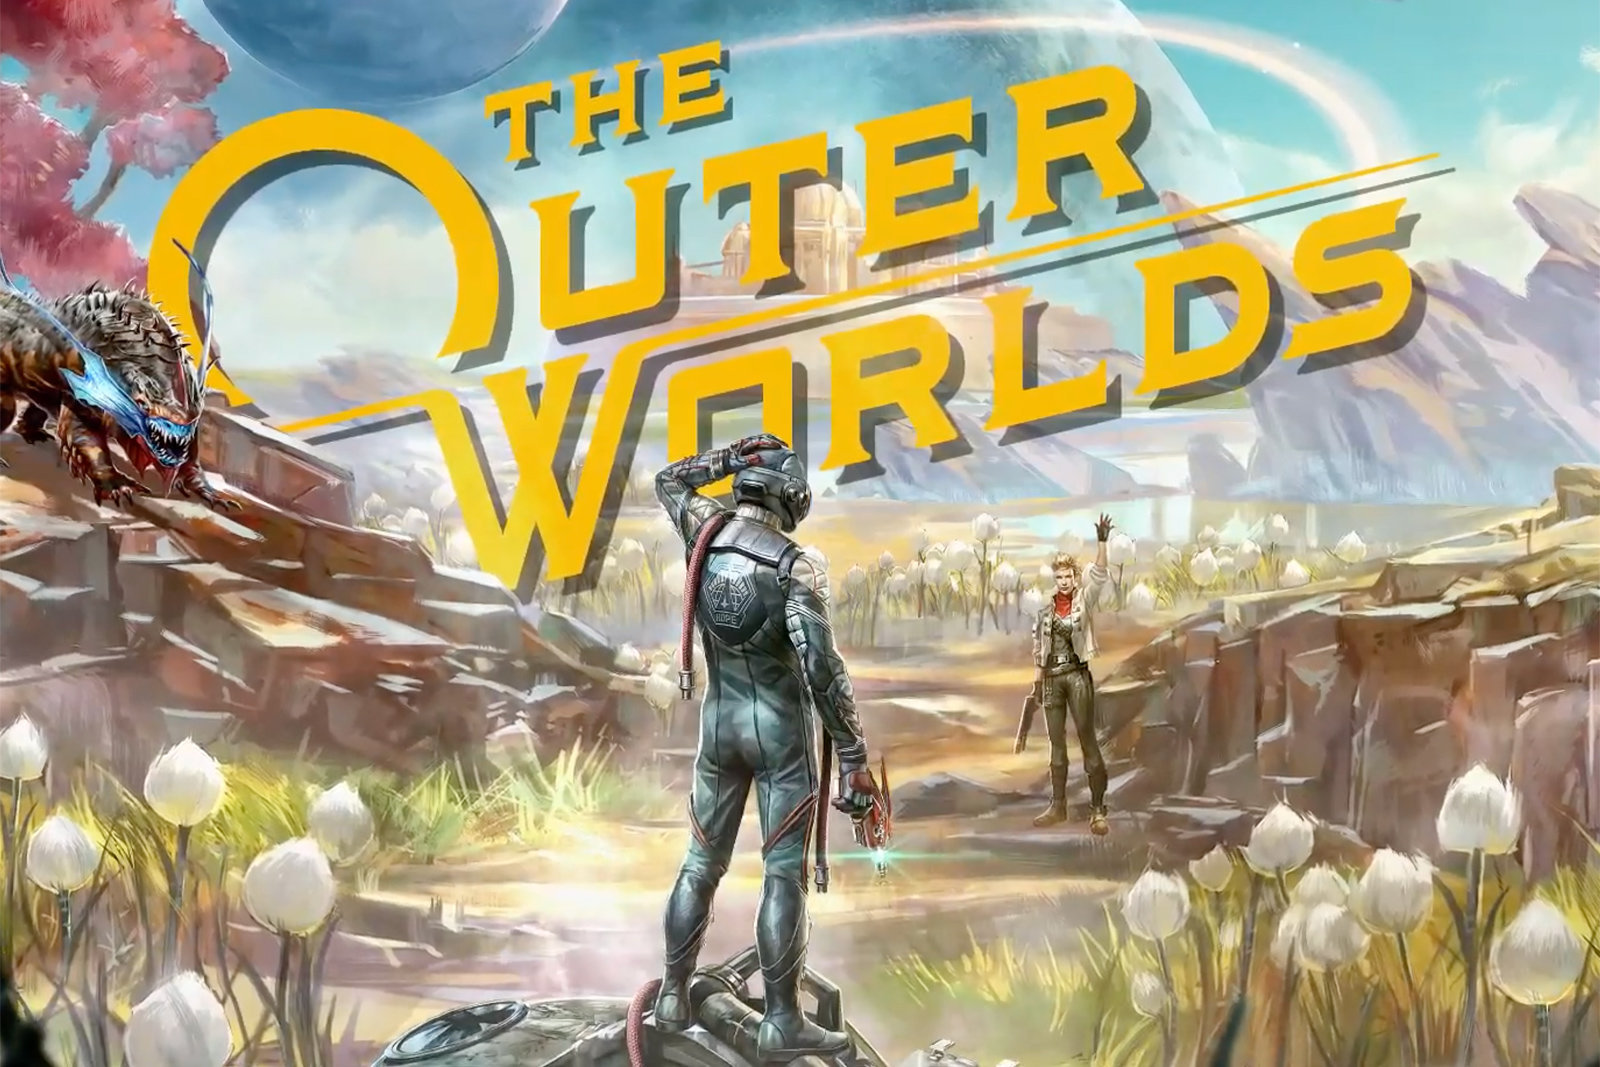 THE OUTER WORLDS [E3 2019]: Fallout's Infinite Skies.